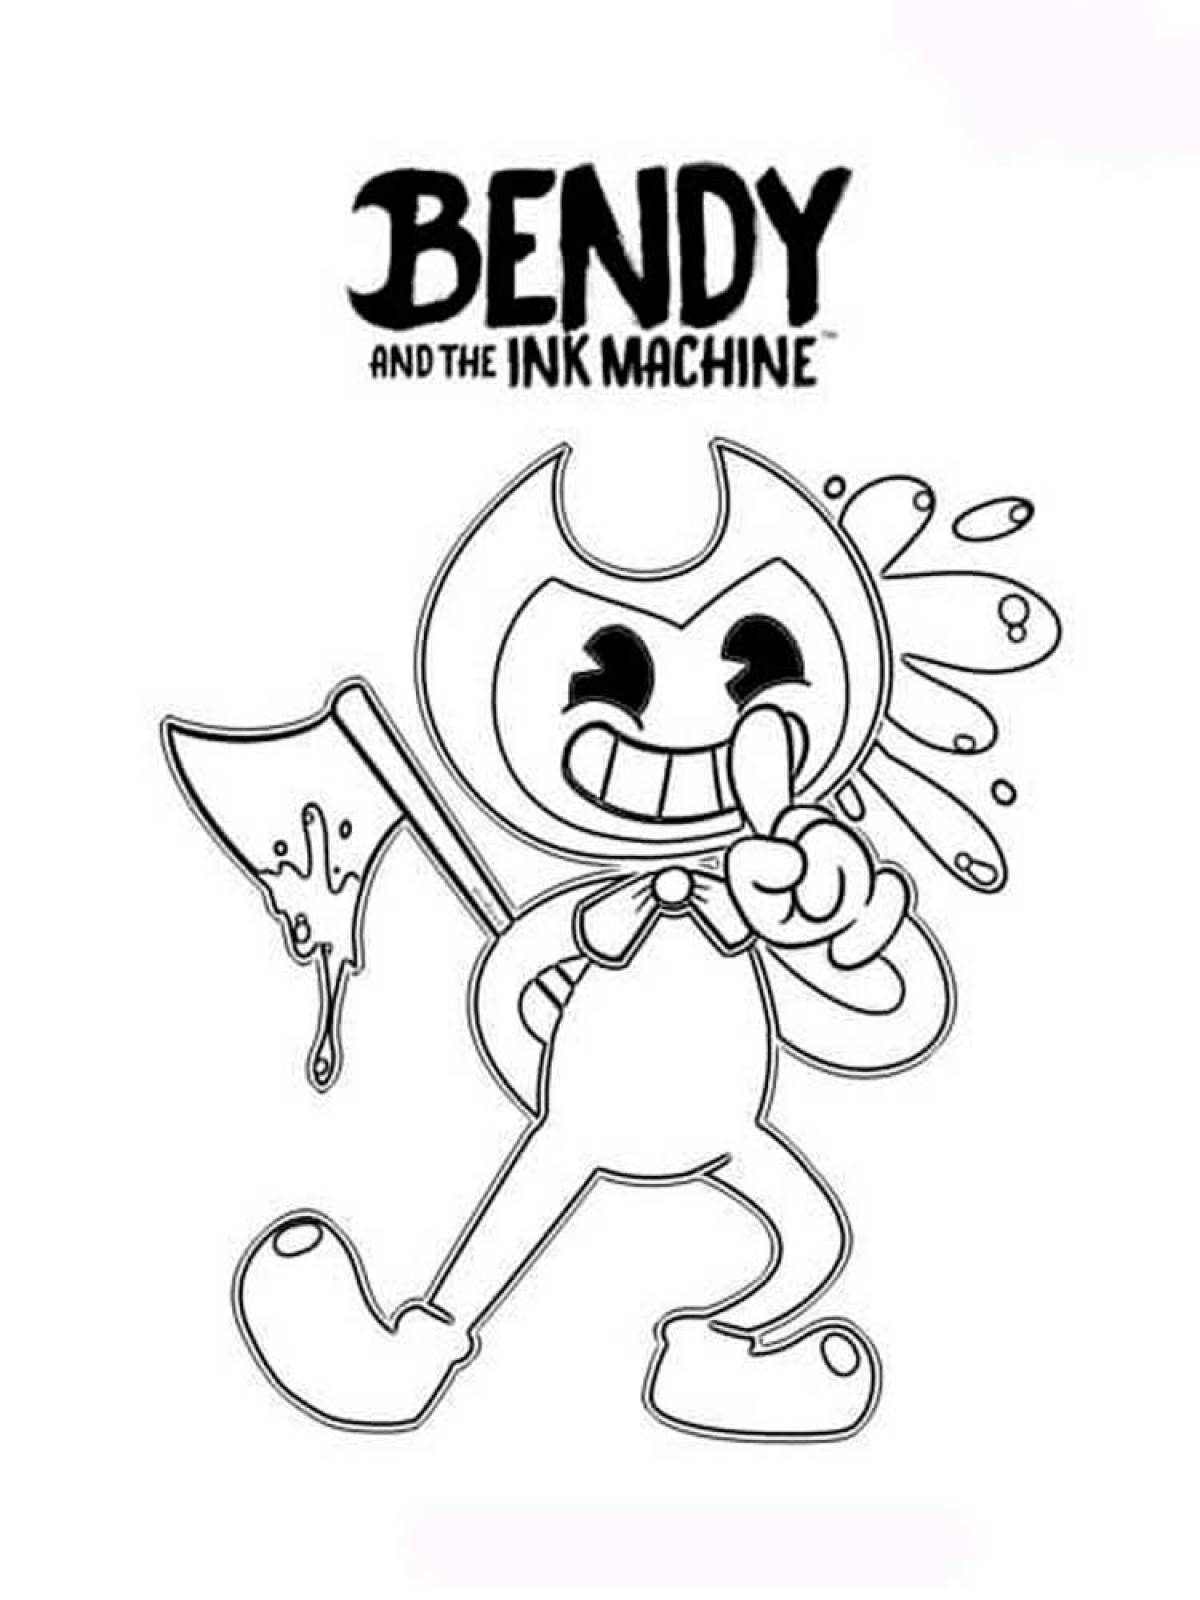 Photo Bendy and the Ink Machine 10